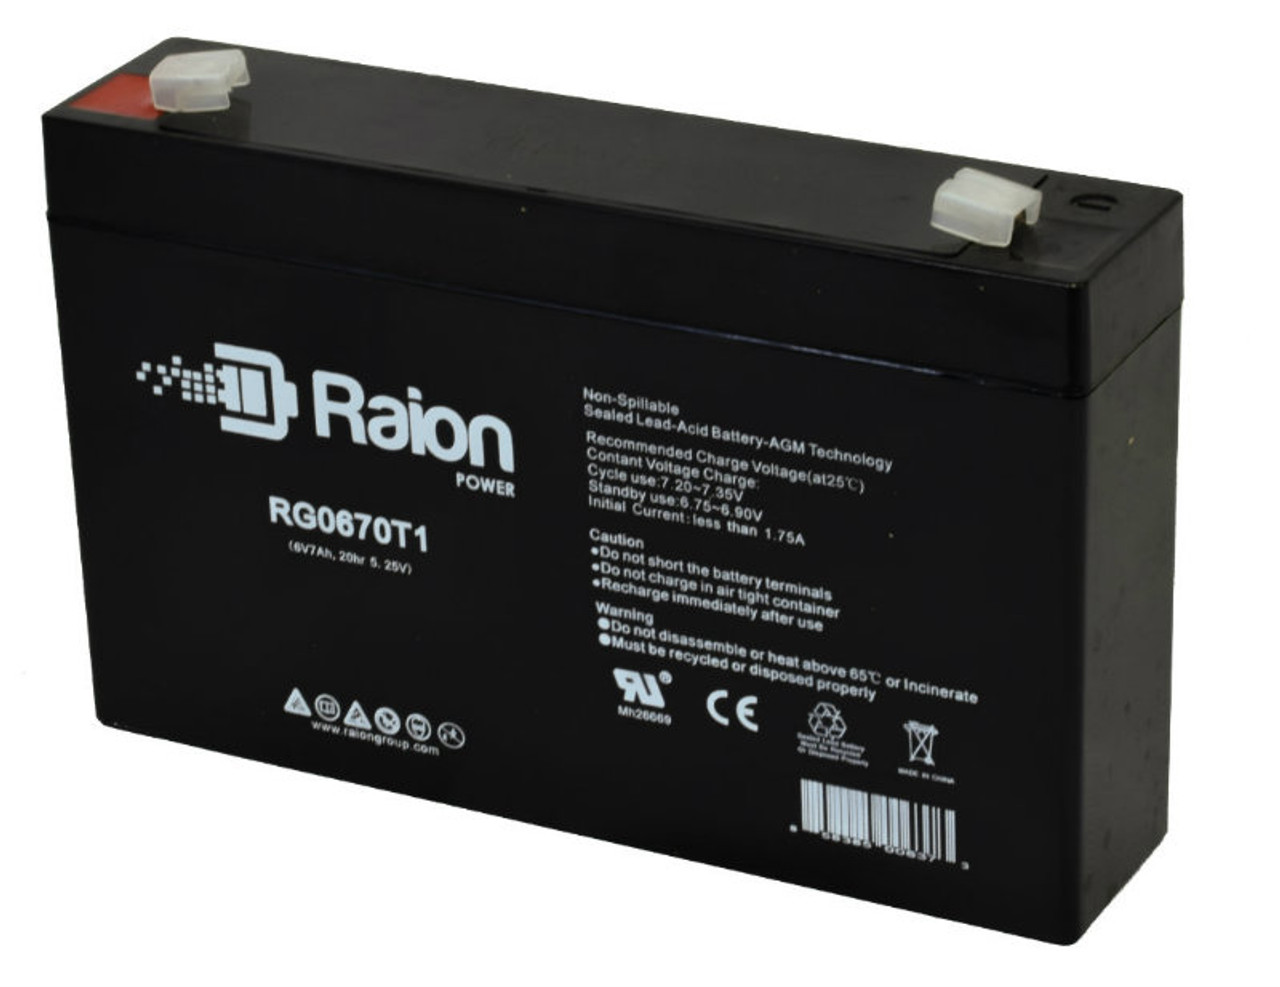 Raion Power RG0670T1 6V 7Ah Replacement Battery Cartridge for Lionville Systems 600 Med Cart Medical Equipment